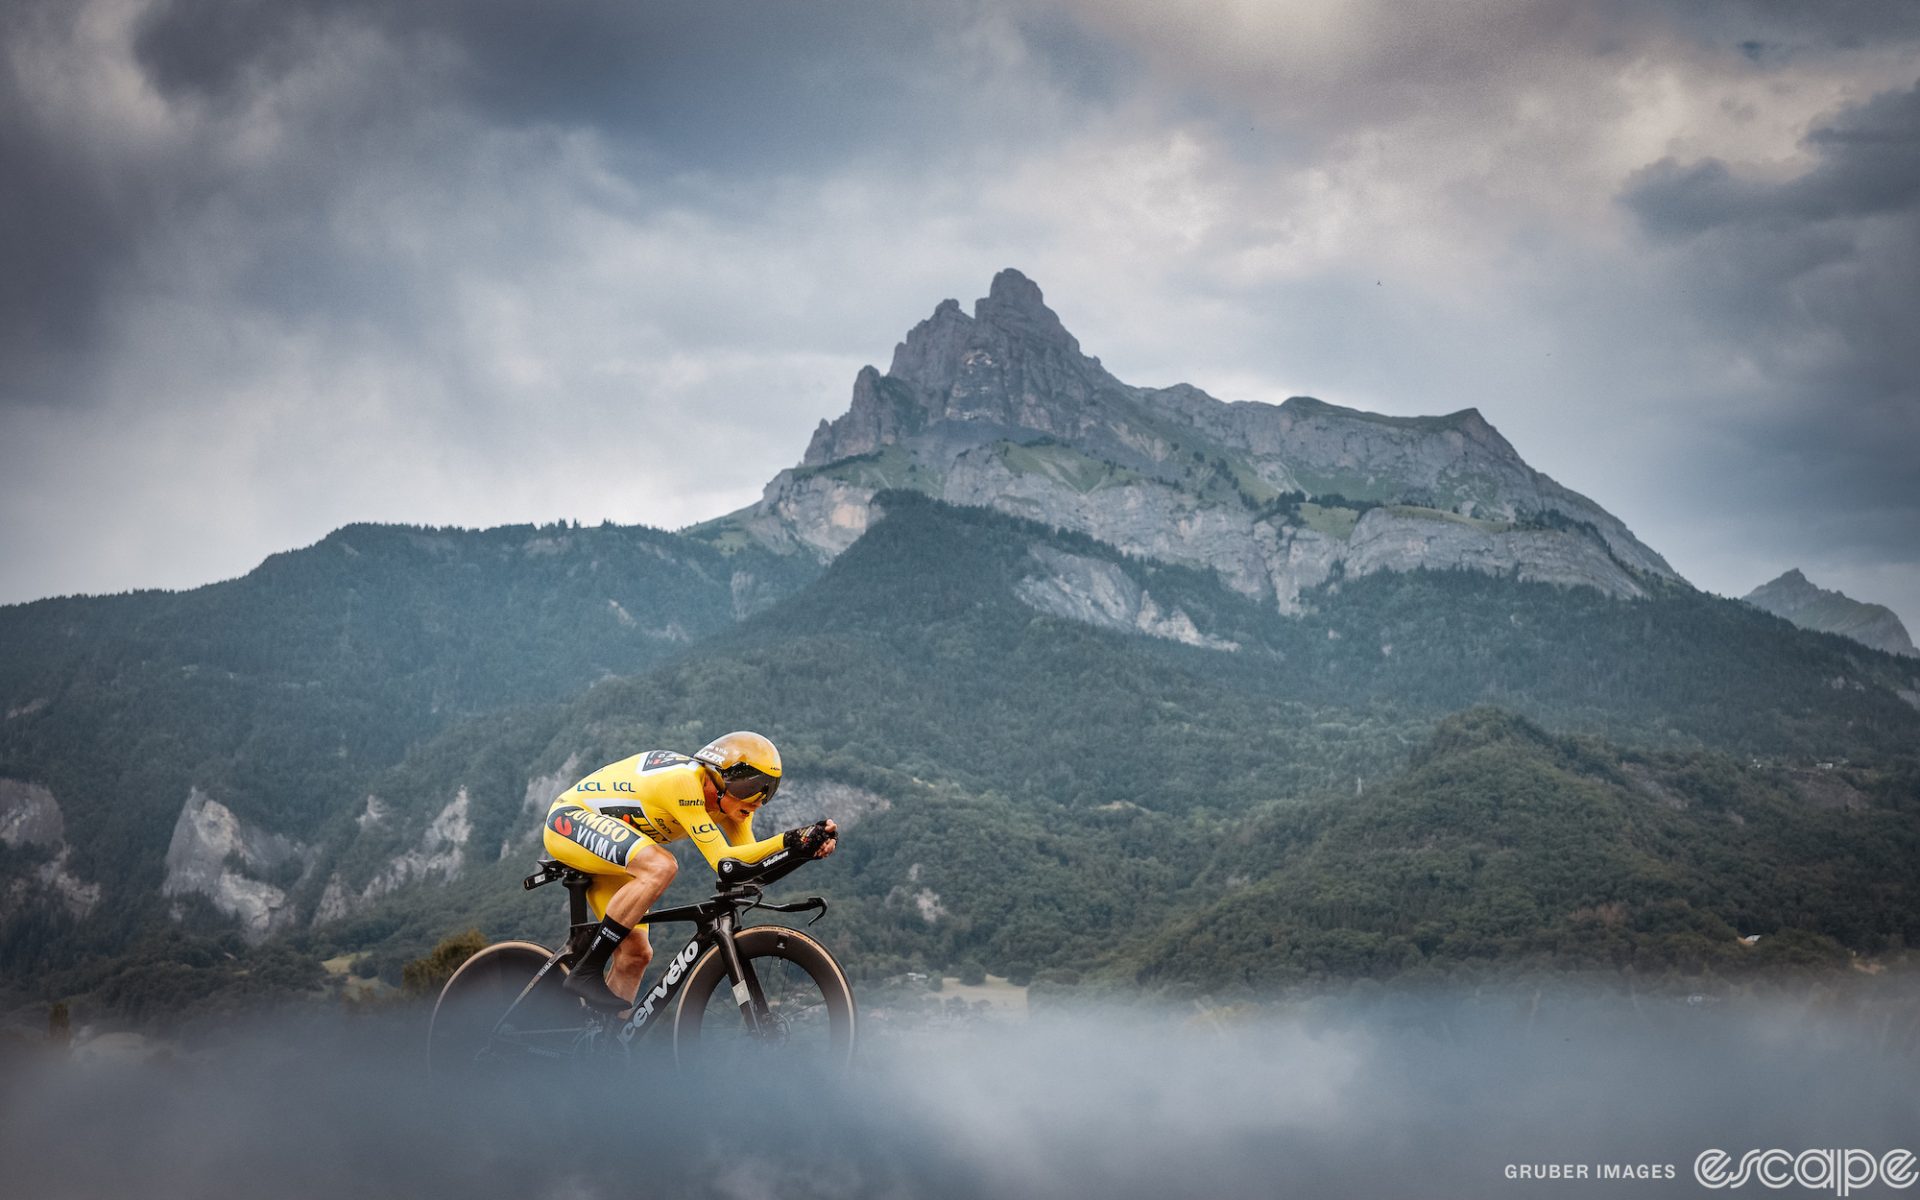 Jonas Vingegaard time trials at the 2023 Tour de France. He's in an exceptionally aero position, shown alone on a backdrop of a rugged mountain behind him with a steep, rocky peak, and the foreground is slightly blurred to create a moody feel.